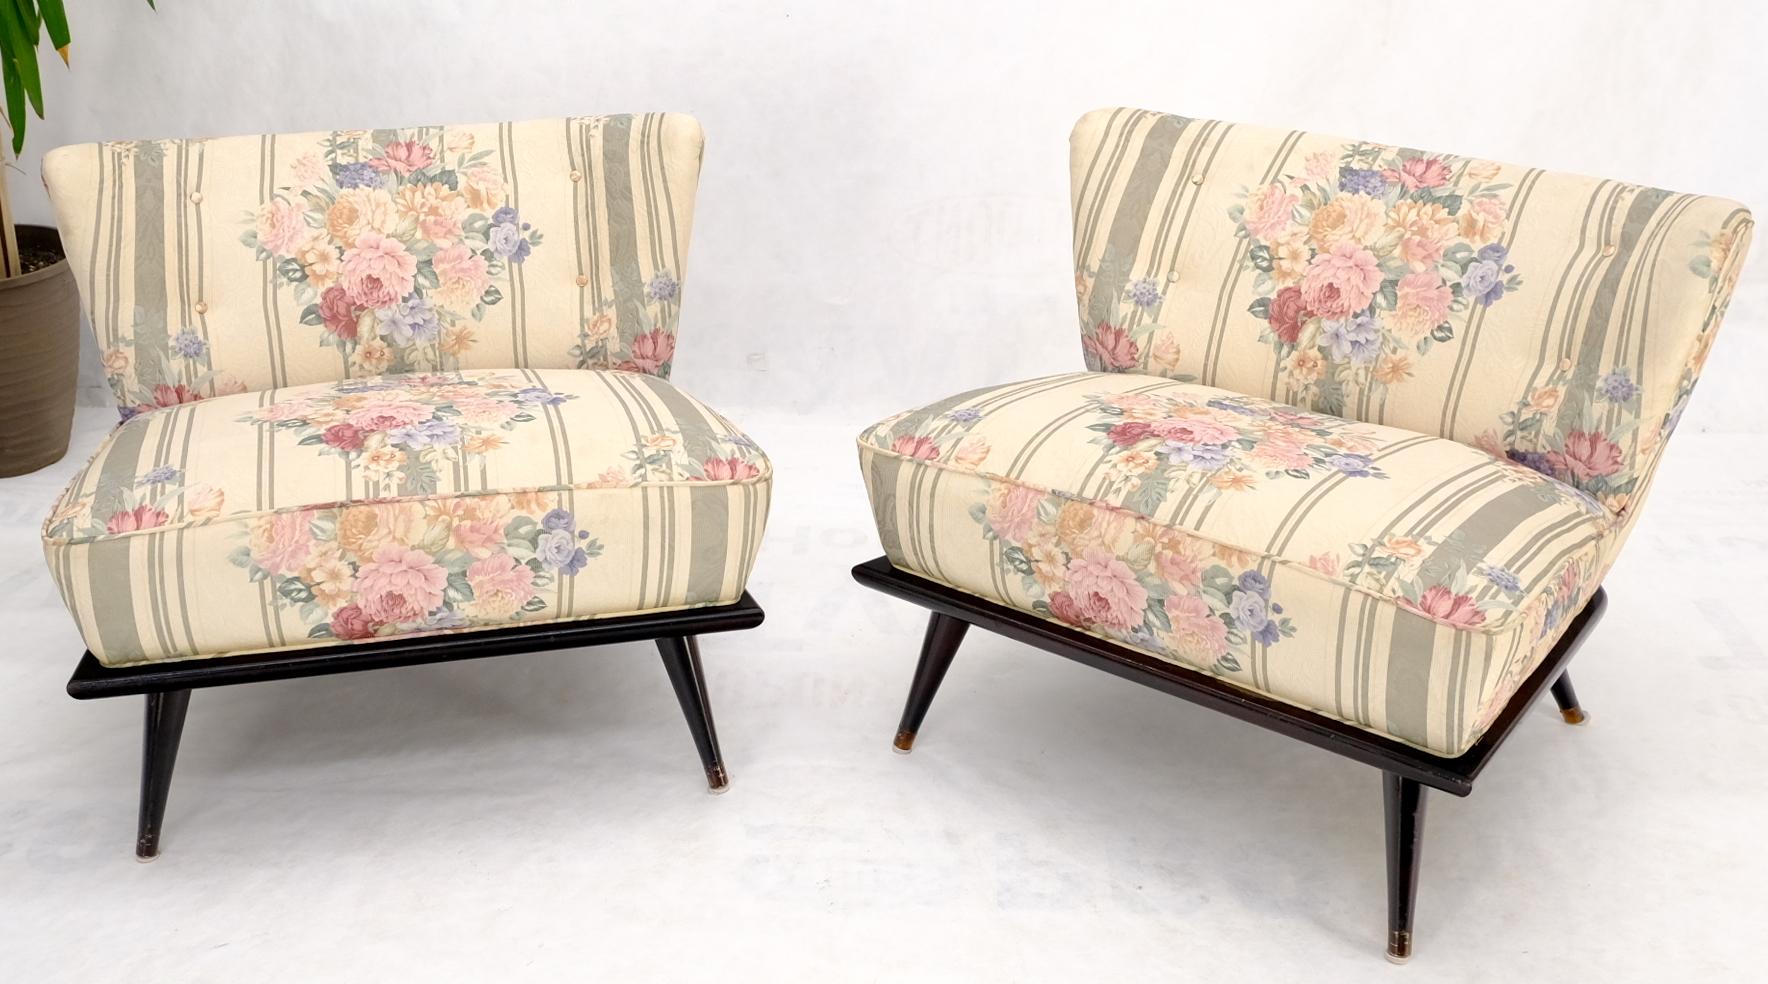 Pair of Mid-Century Modern to Art Deco fan back wide spring seat lounge chairs.